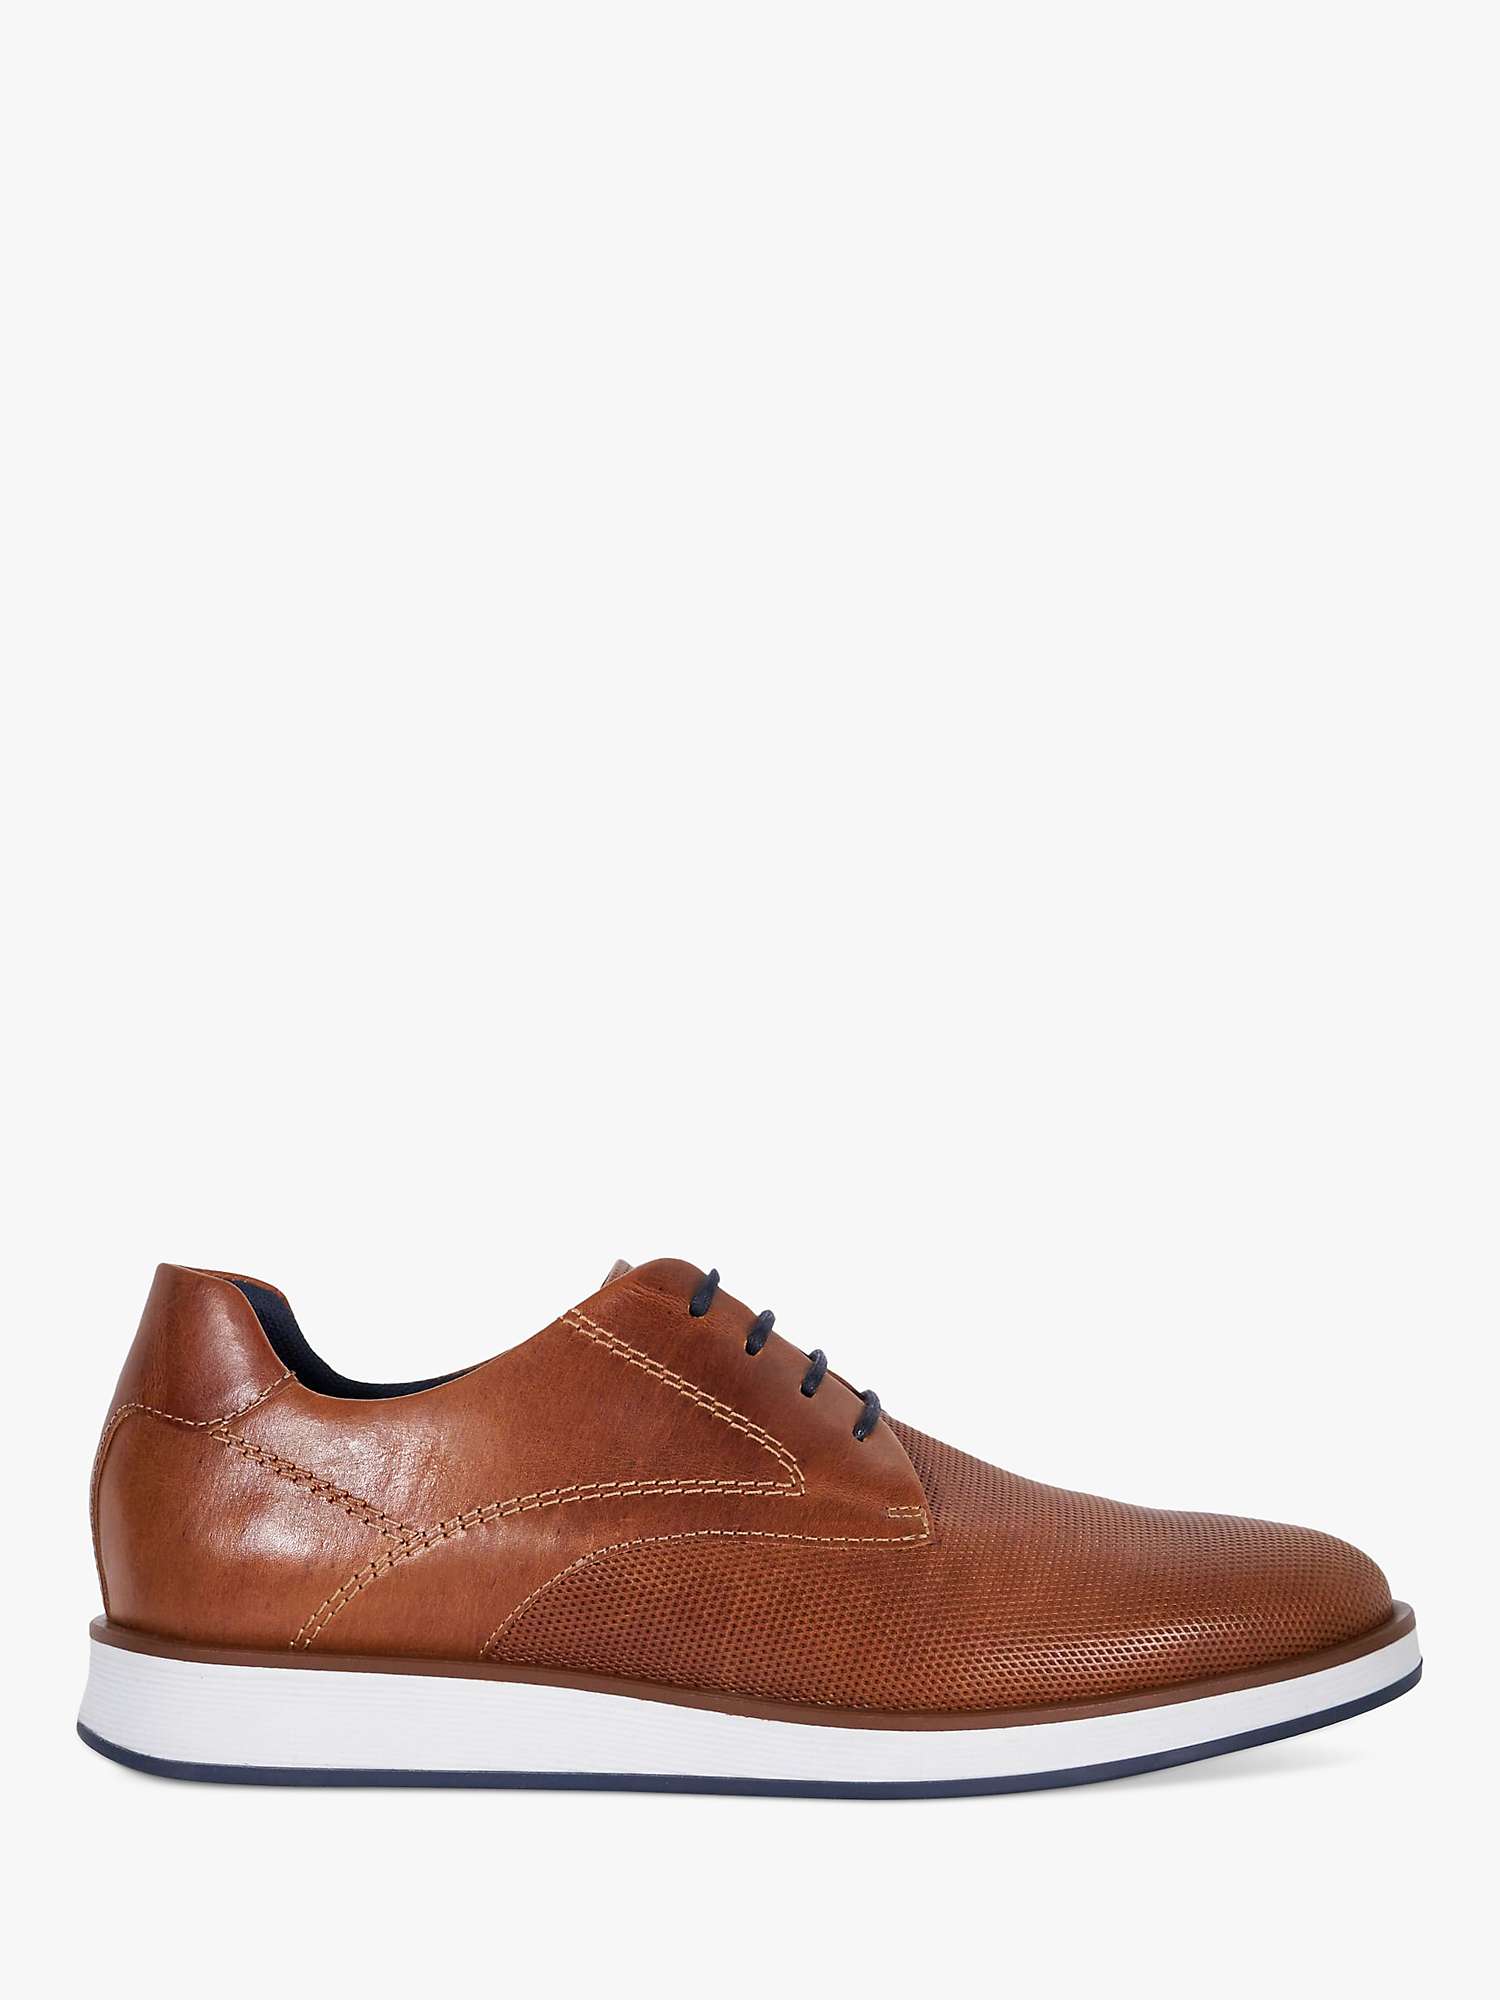 Buy Dune Beko Perforated Leather Gibson Shoes, Tan Online at johnlewis.com